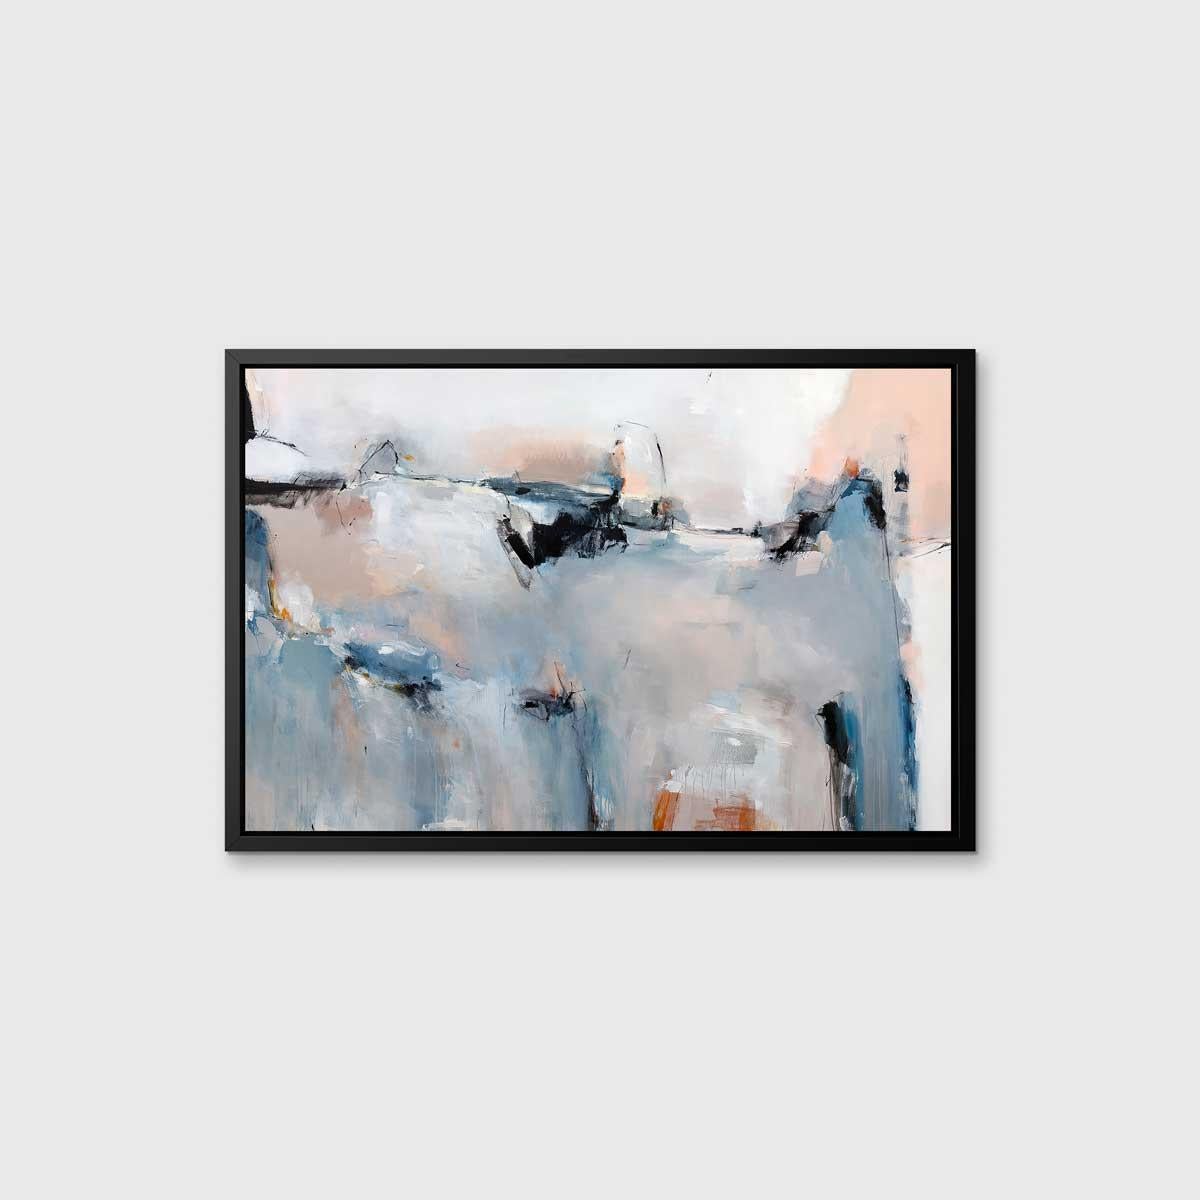 This contemporary abstract Limited Edition giclee print features cool blues and contrasting warm pinks, with light grey and white highlights. Stark charcoal black accents are placed in large, gestural strokes, thin lines, and blended throughout.